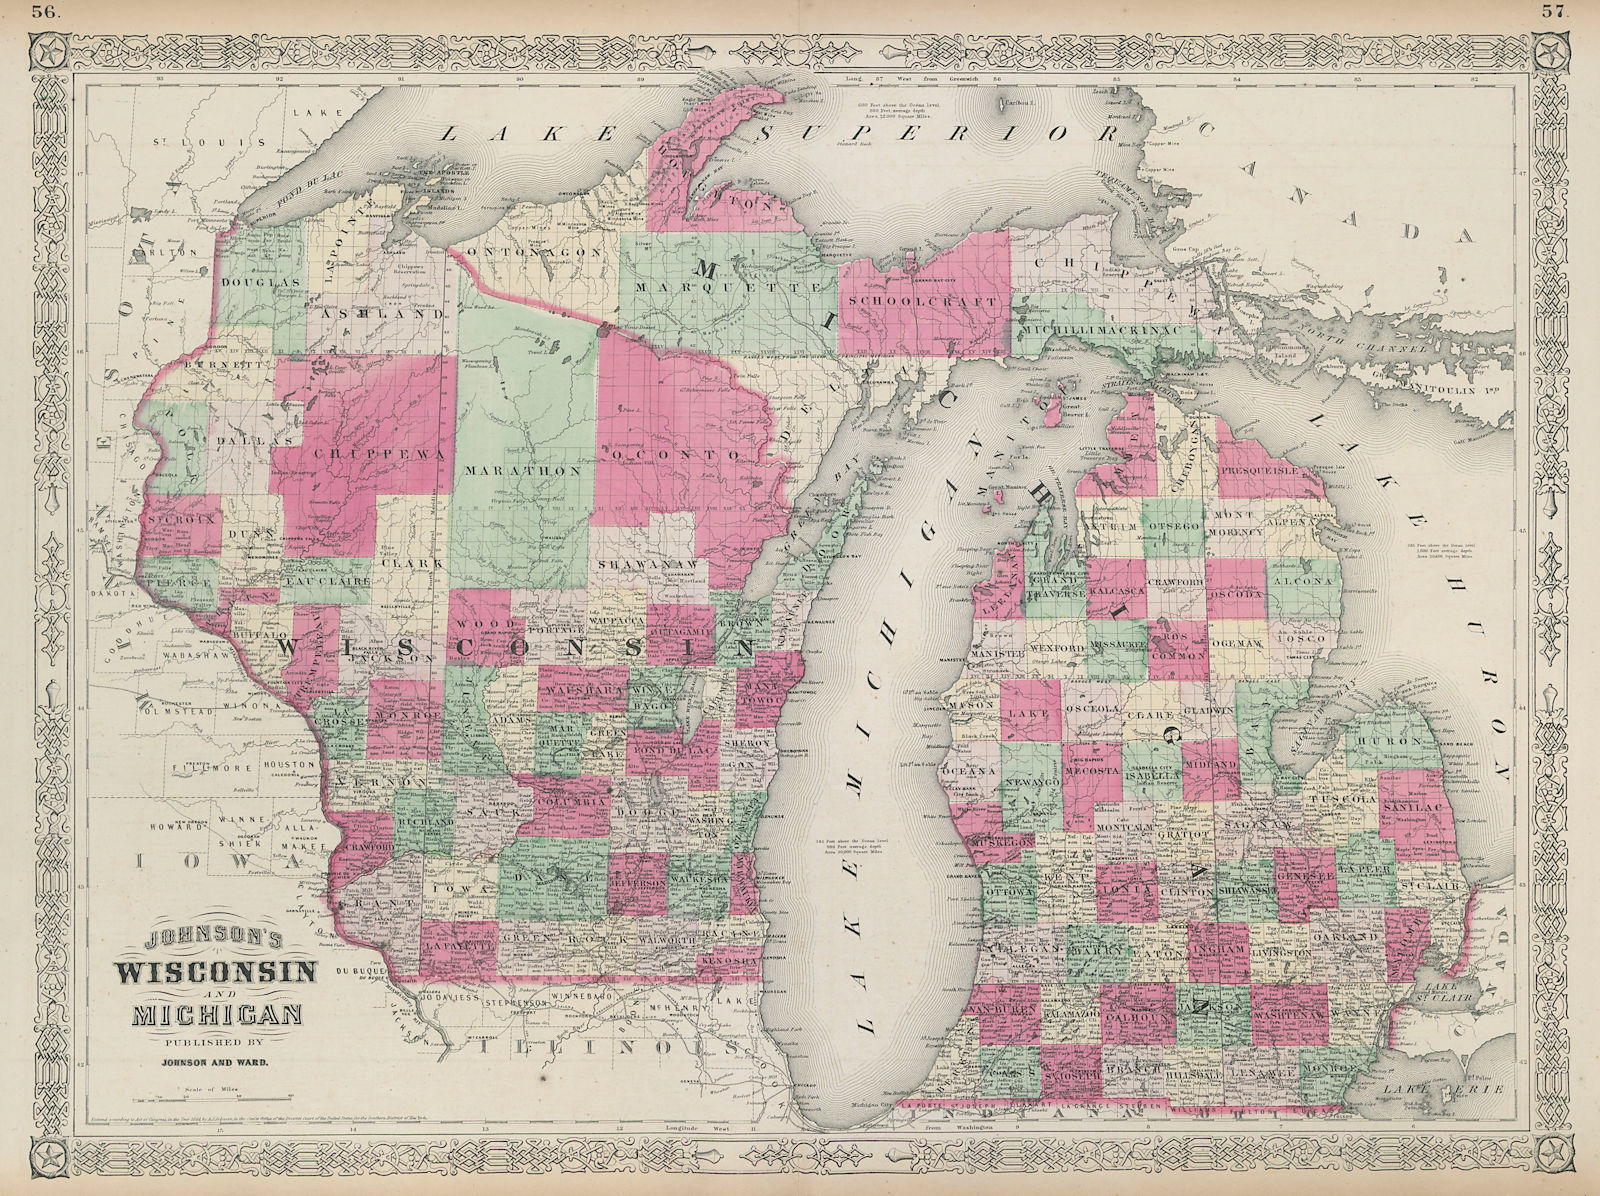 Johnson's Wisconsin & Michigan. State map showing counties. Great Lakes 1865